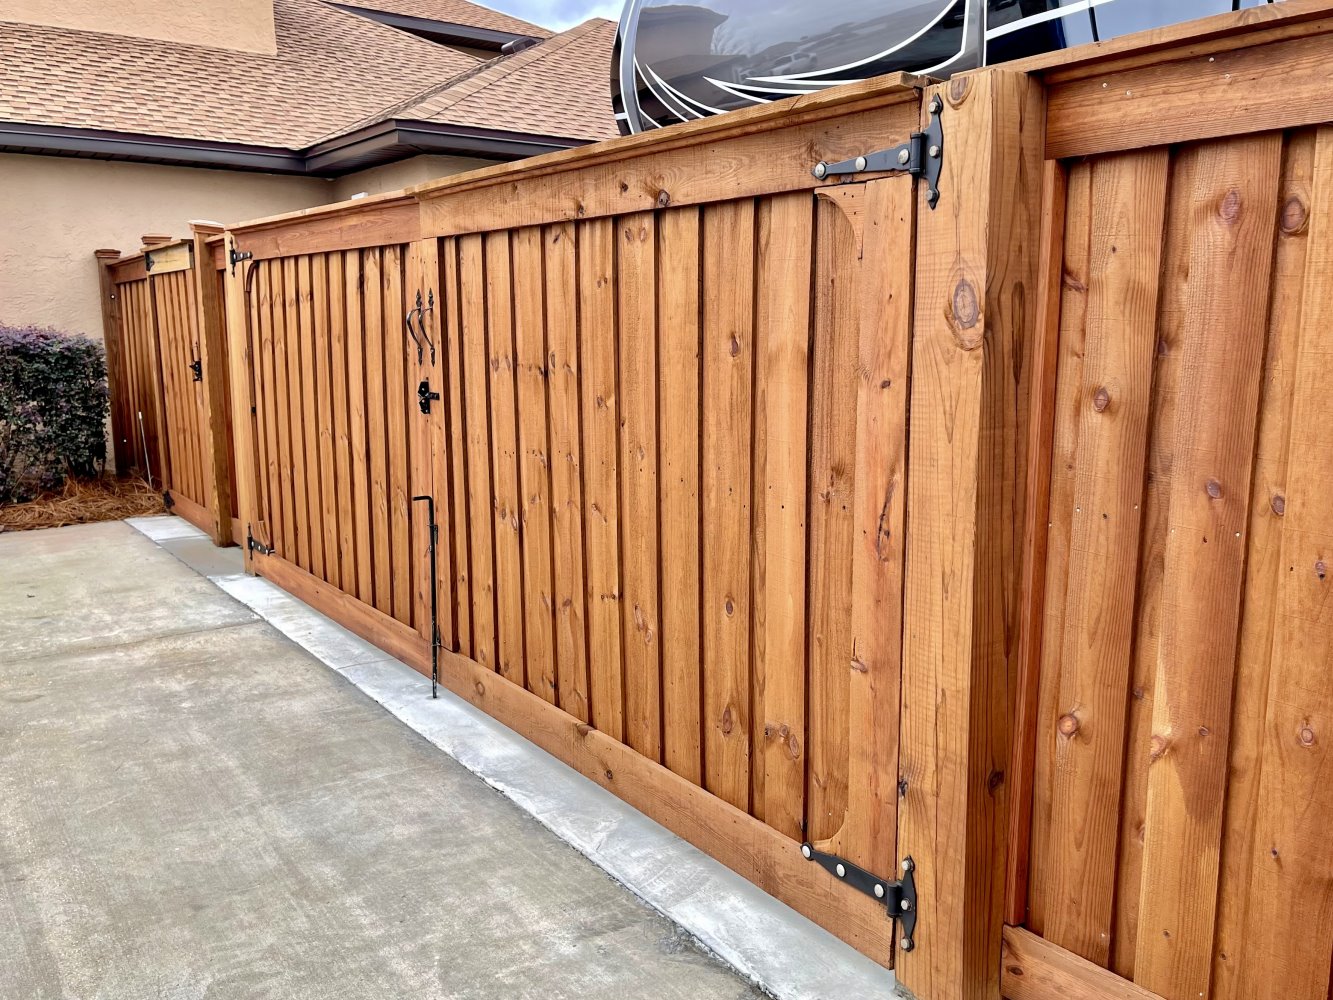 Hastings FL cap and trim style wood fence